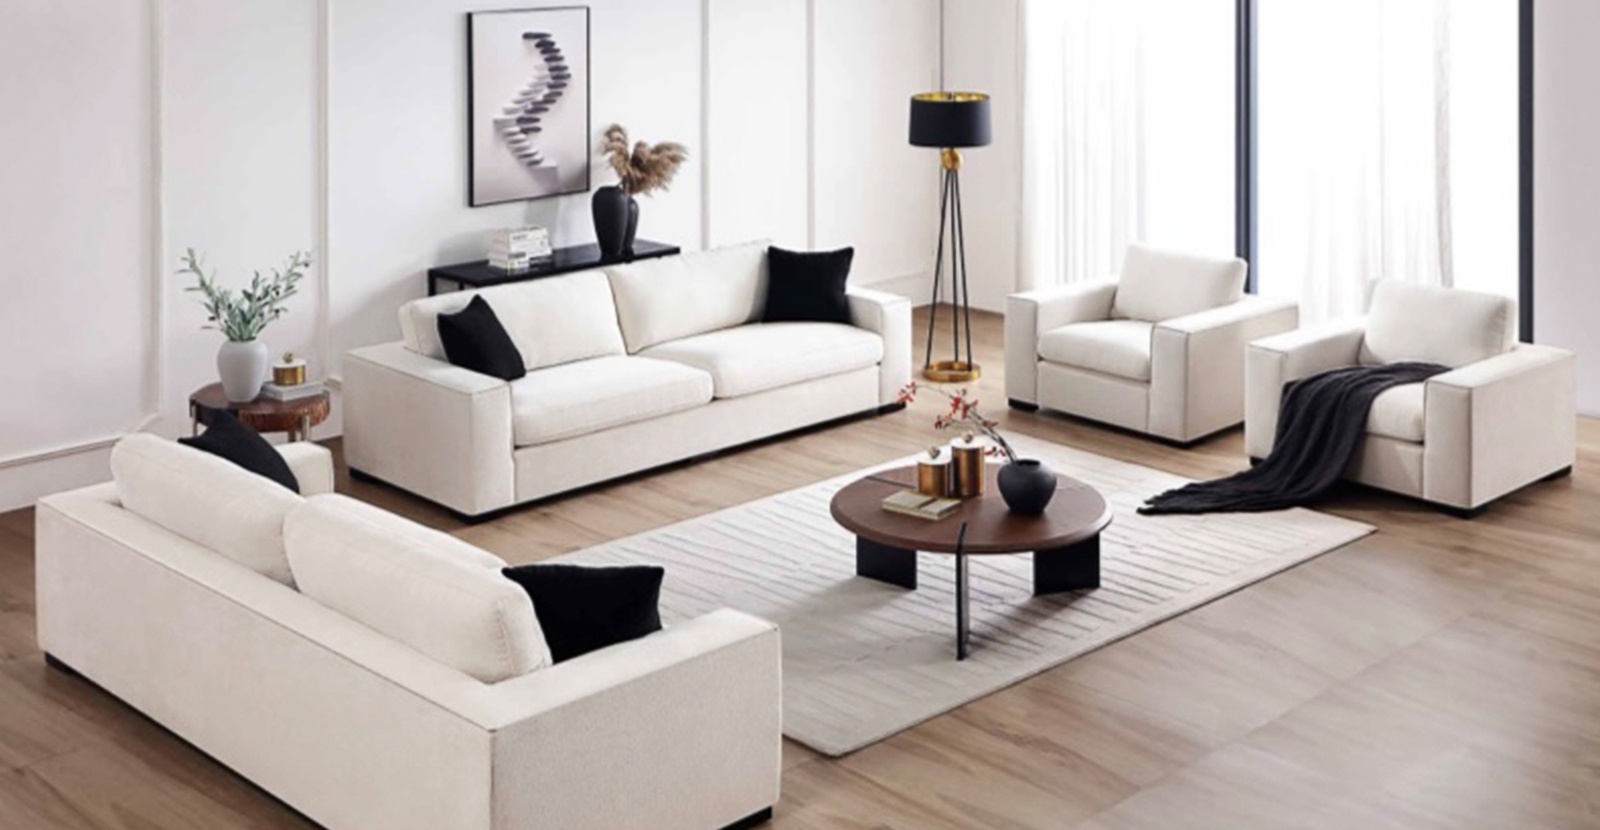 New Avenue Boutique - Modern Furniture Store in Mississauga, Ontario